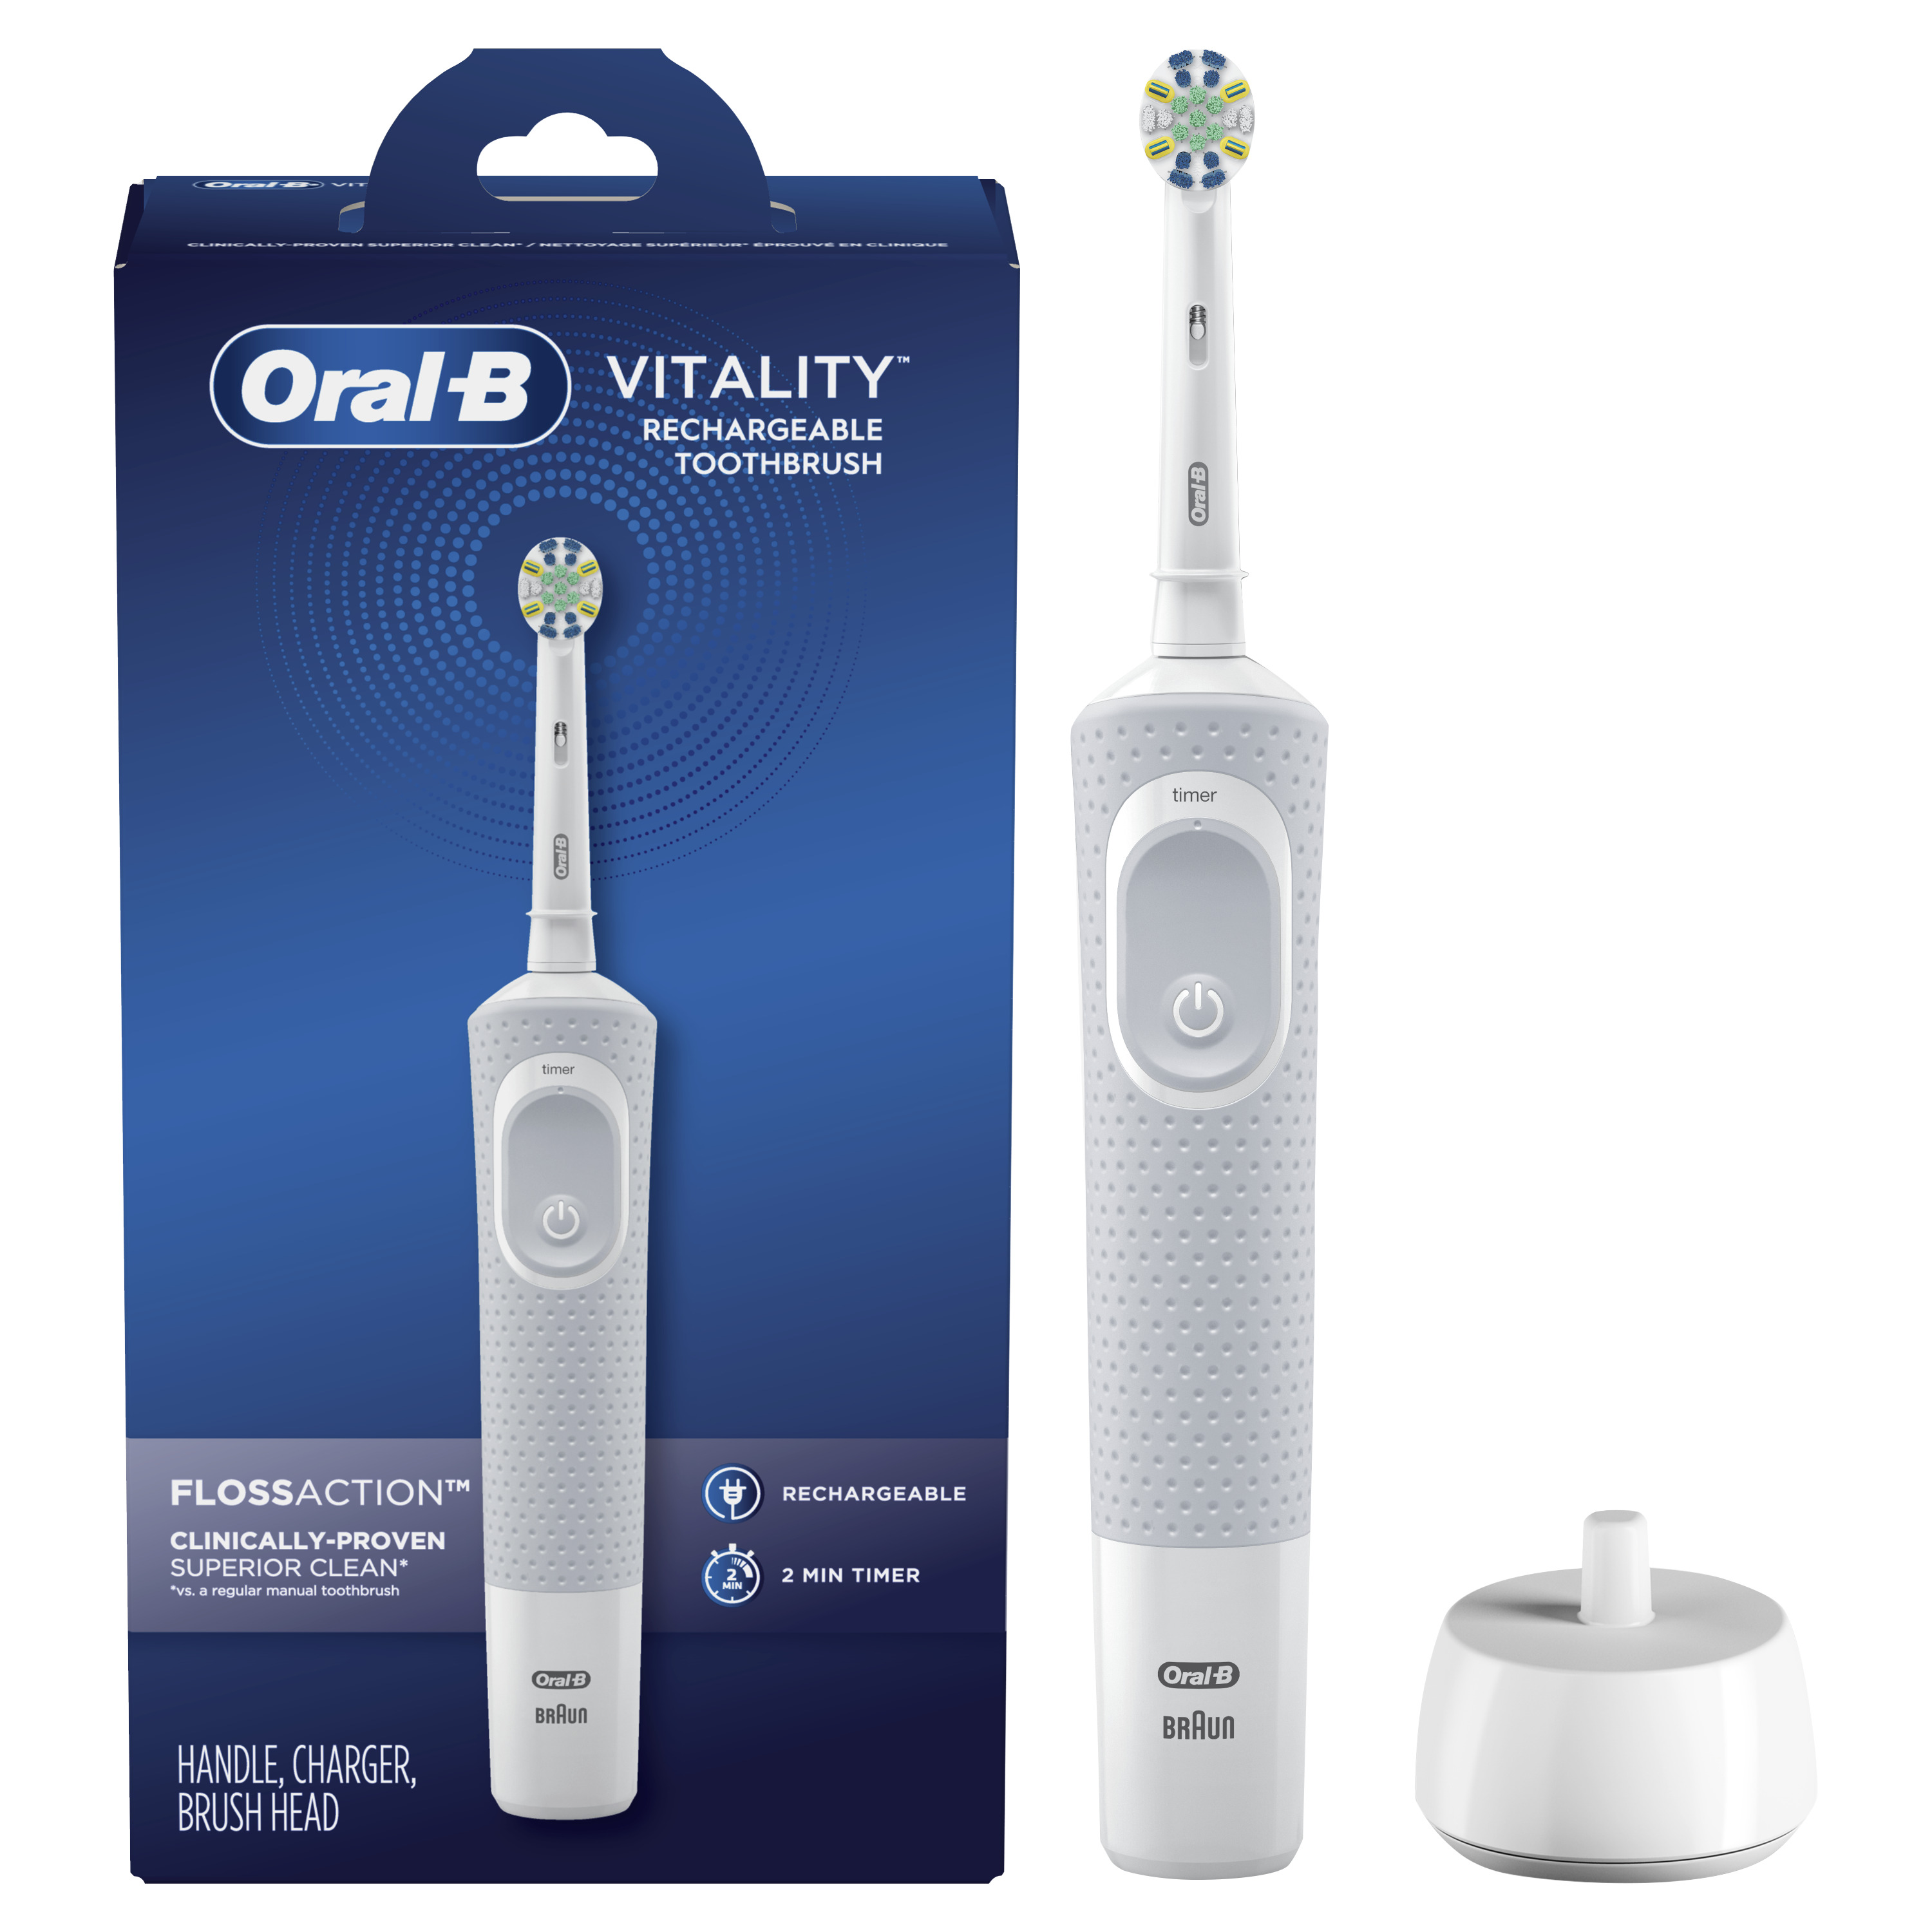 Oral-B Vitality FlossAction Electric Rechargeable Toothbrush, Powered by Braun, for Adults & Children 3+ - image 1 of 6